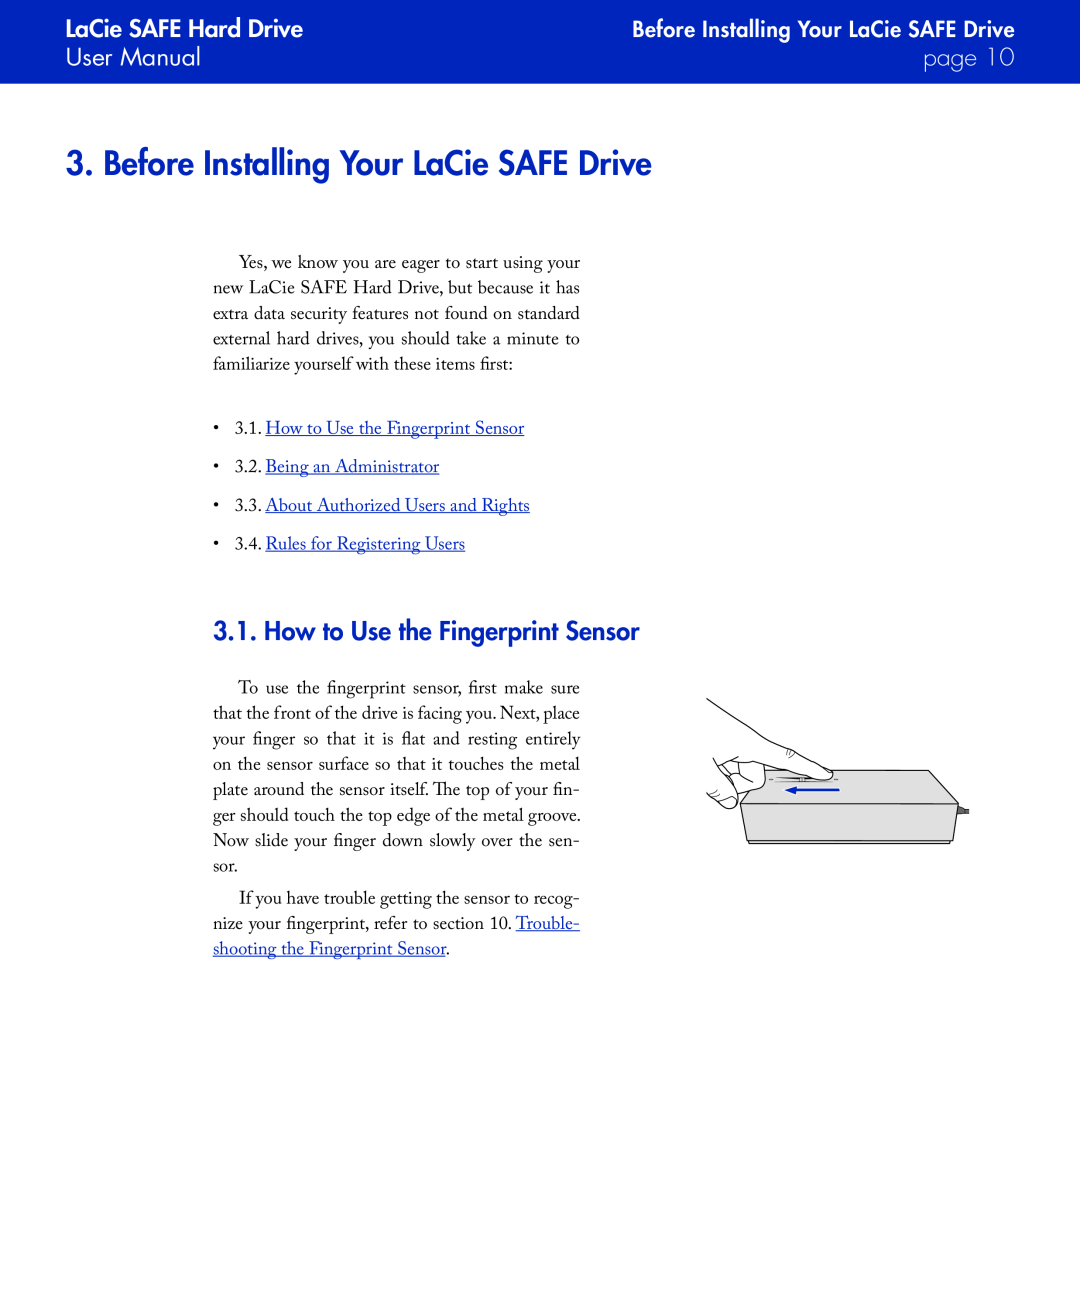 LaCie Before Installing Your LaCie SAFE Drive, How to Use the Fingerprint Sensor, page, Rules for Registering Users 